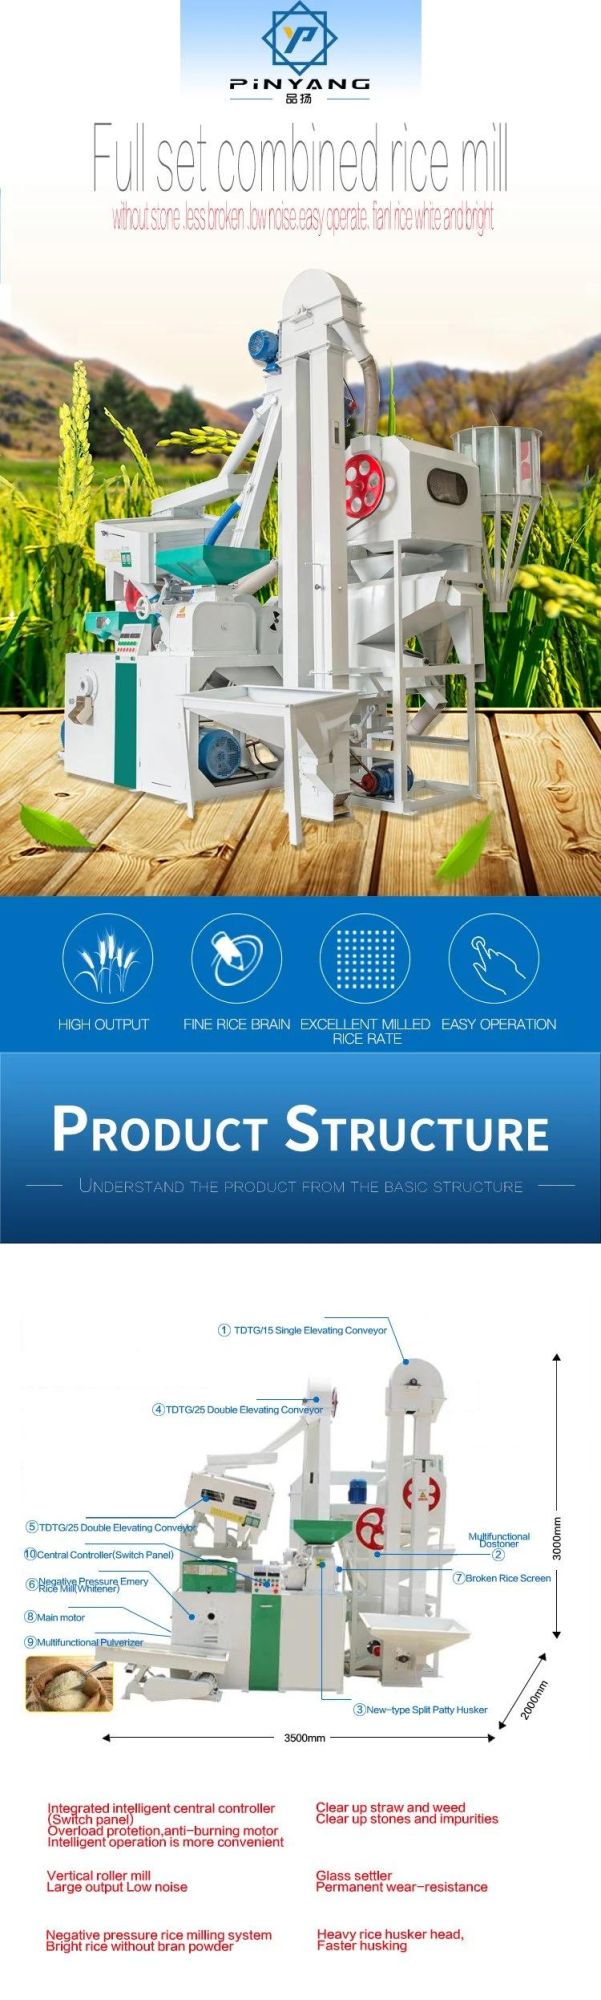 China Model Hot Sell Combined Rice Mill for Rice Business